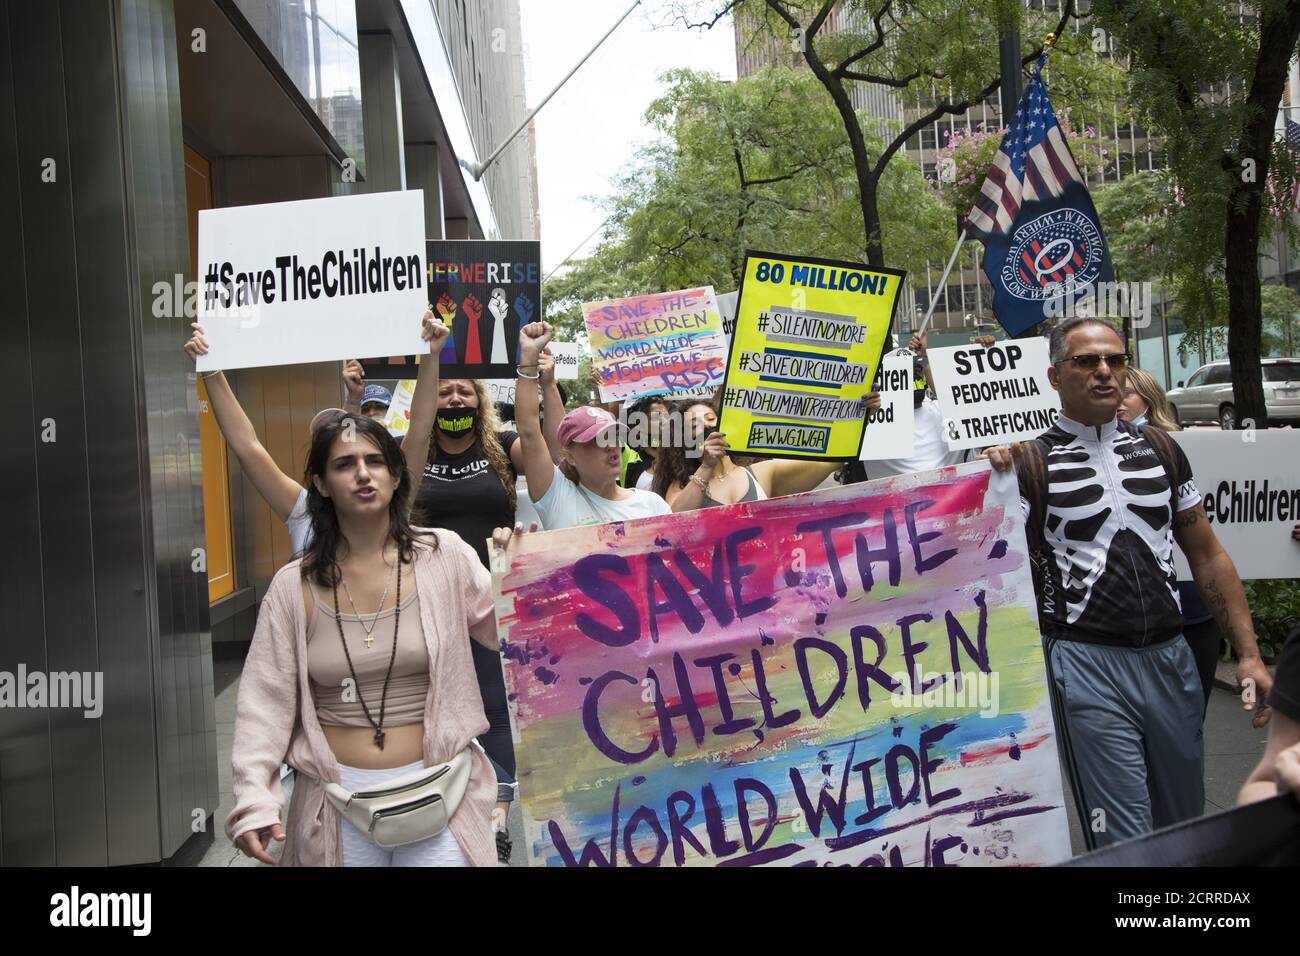 Save the Children march, with a coalition of groups, including QAnon, focused on world hunger, child trafficking, foster care, child abuse, war casualties etc, around the United Nations in New York City. Stock Photo